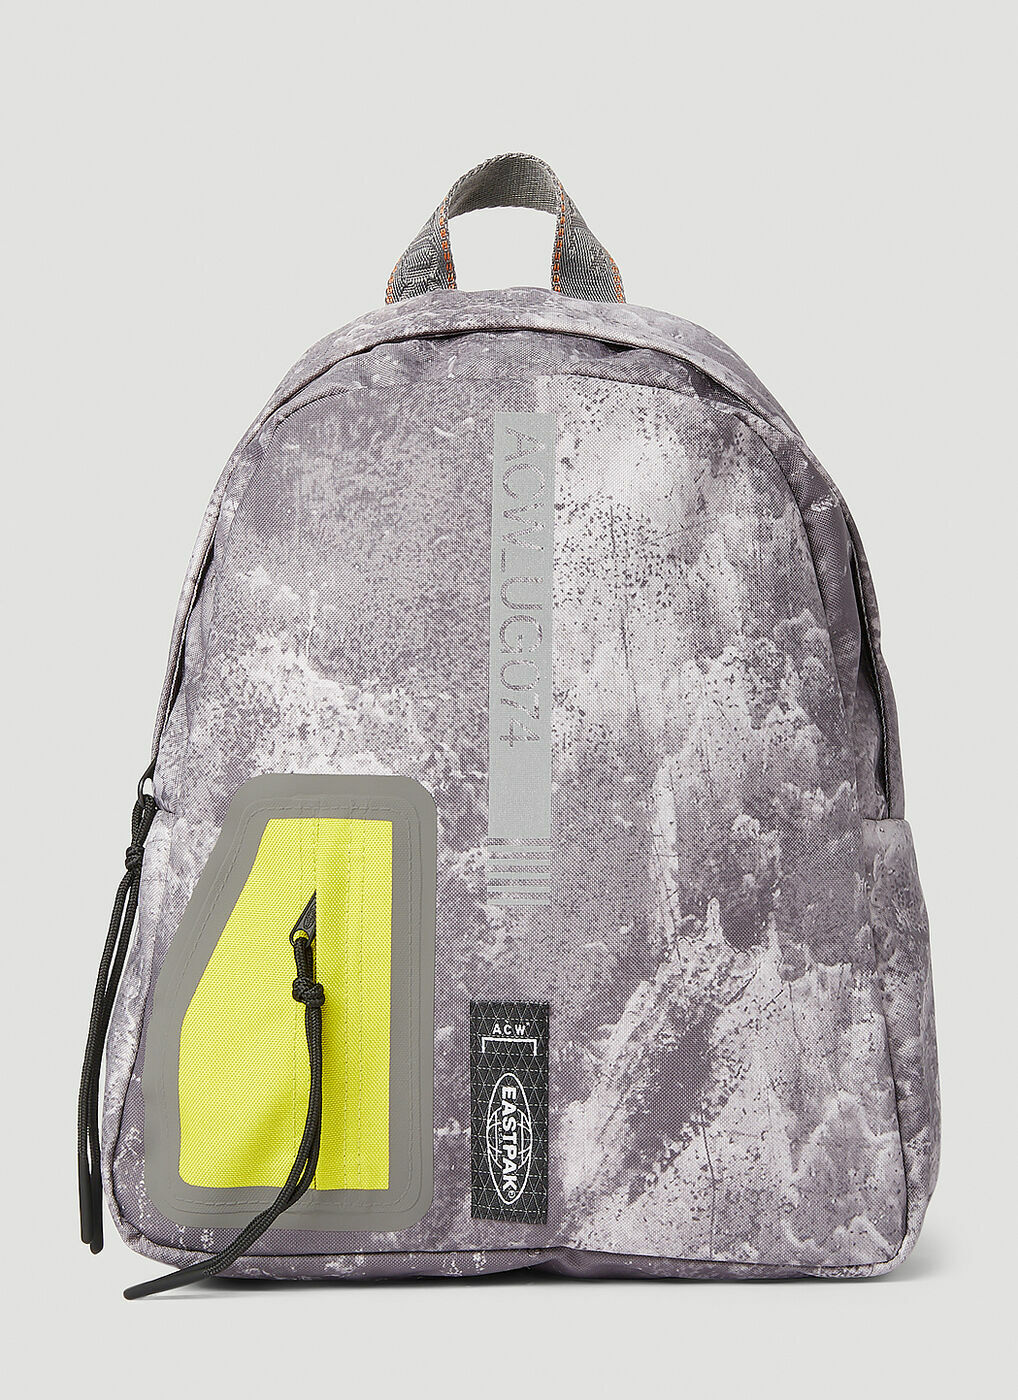 vervangen koppeling insluiten A-COLD-WALL* x Eastpak - Greyscale Small Backpack in Light Grey A-Cold-Wall*